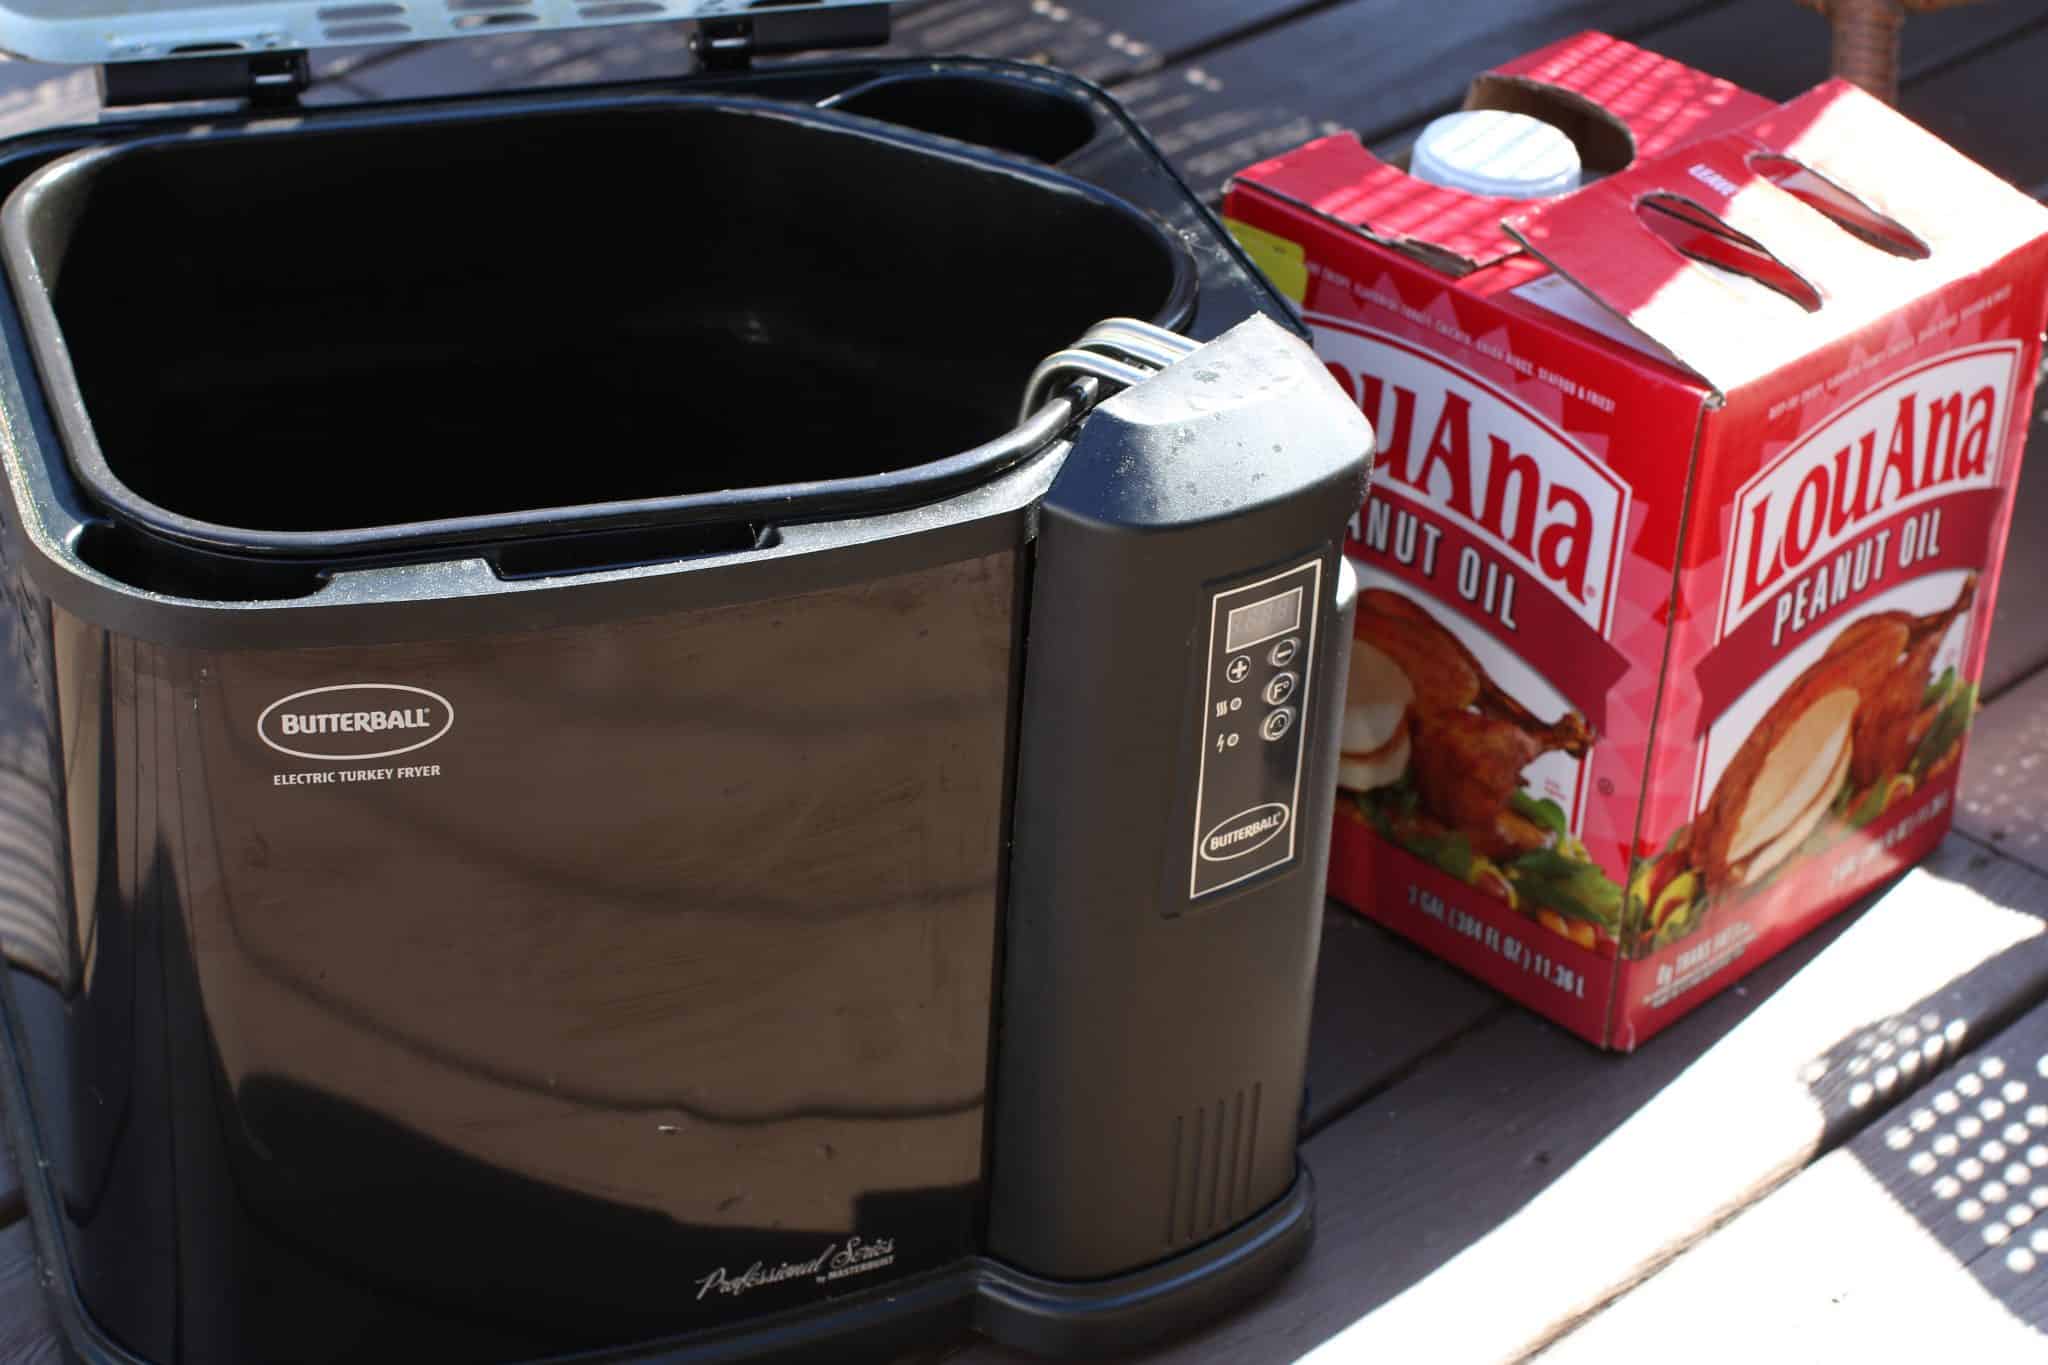 A Butterball Turkey Fryer with Lou Ana Peanut Oil shown sitting outside.